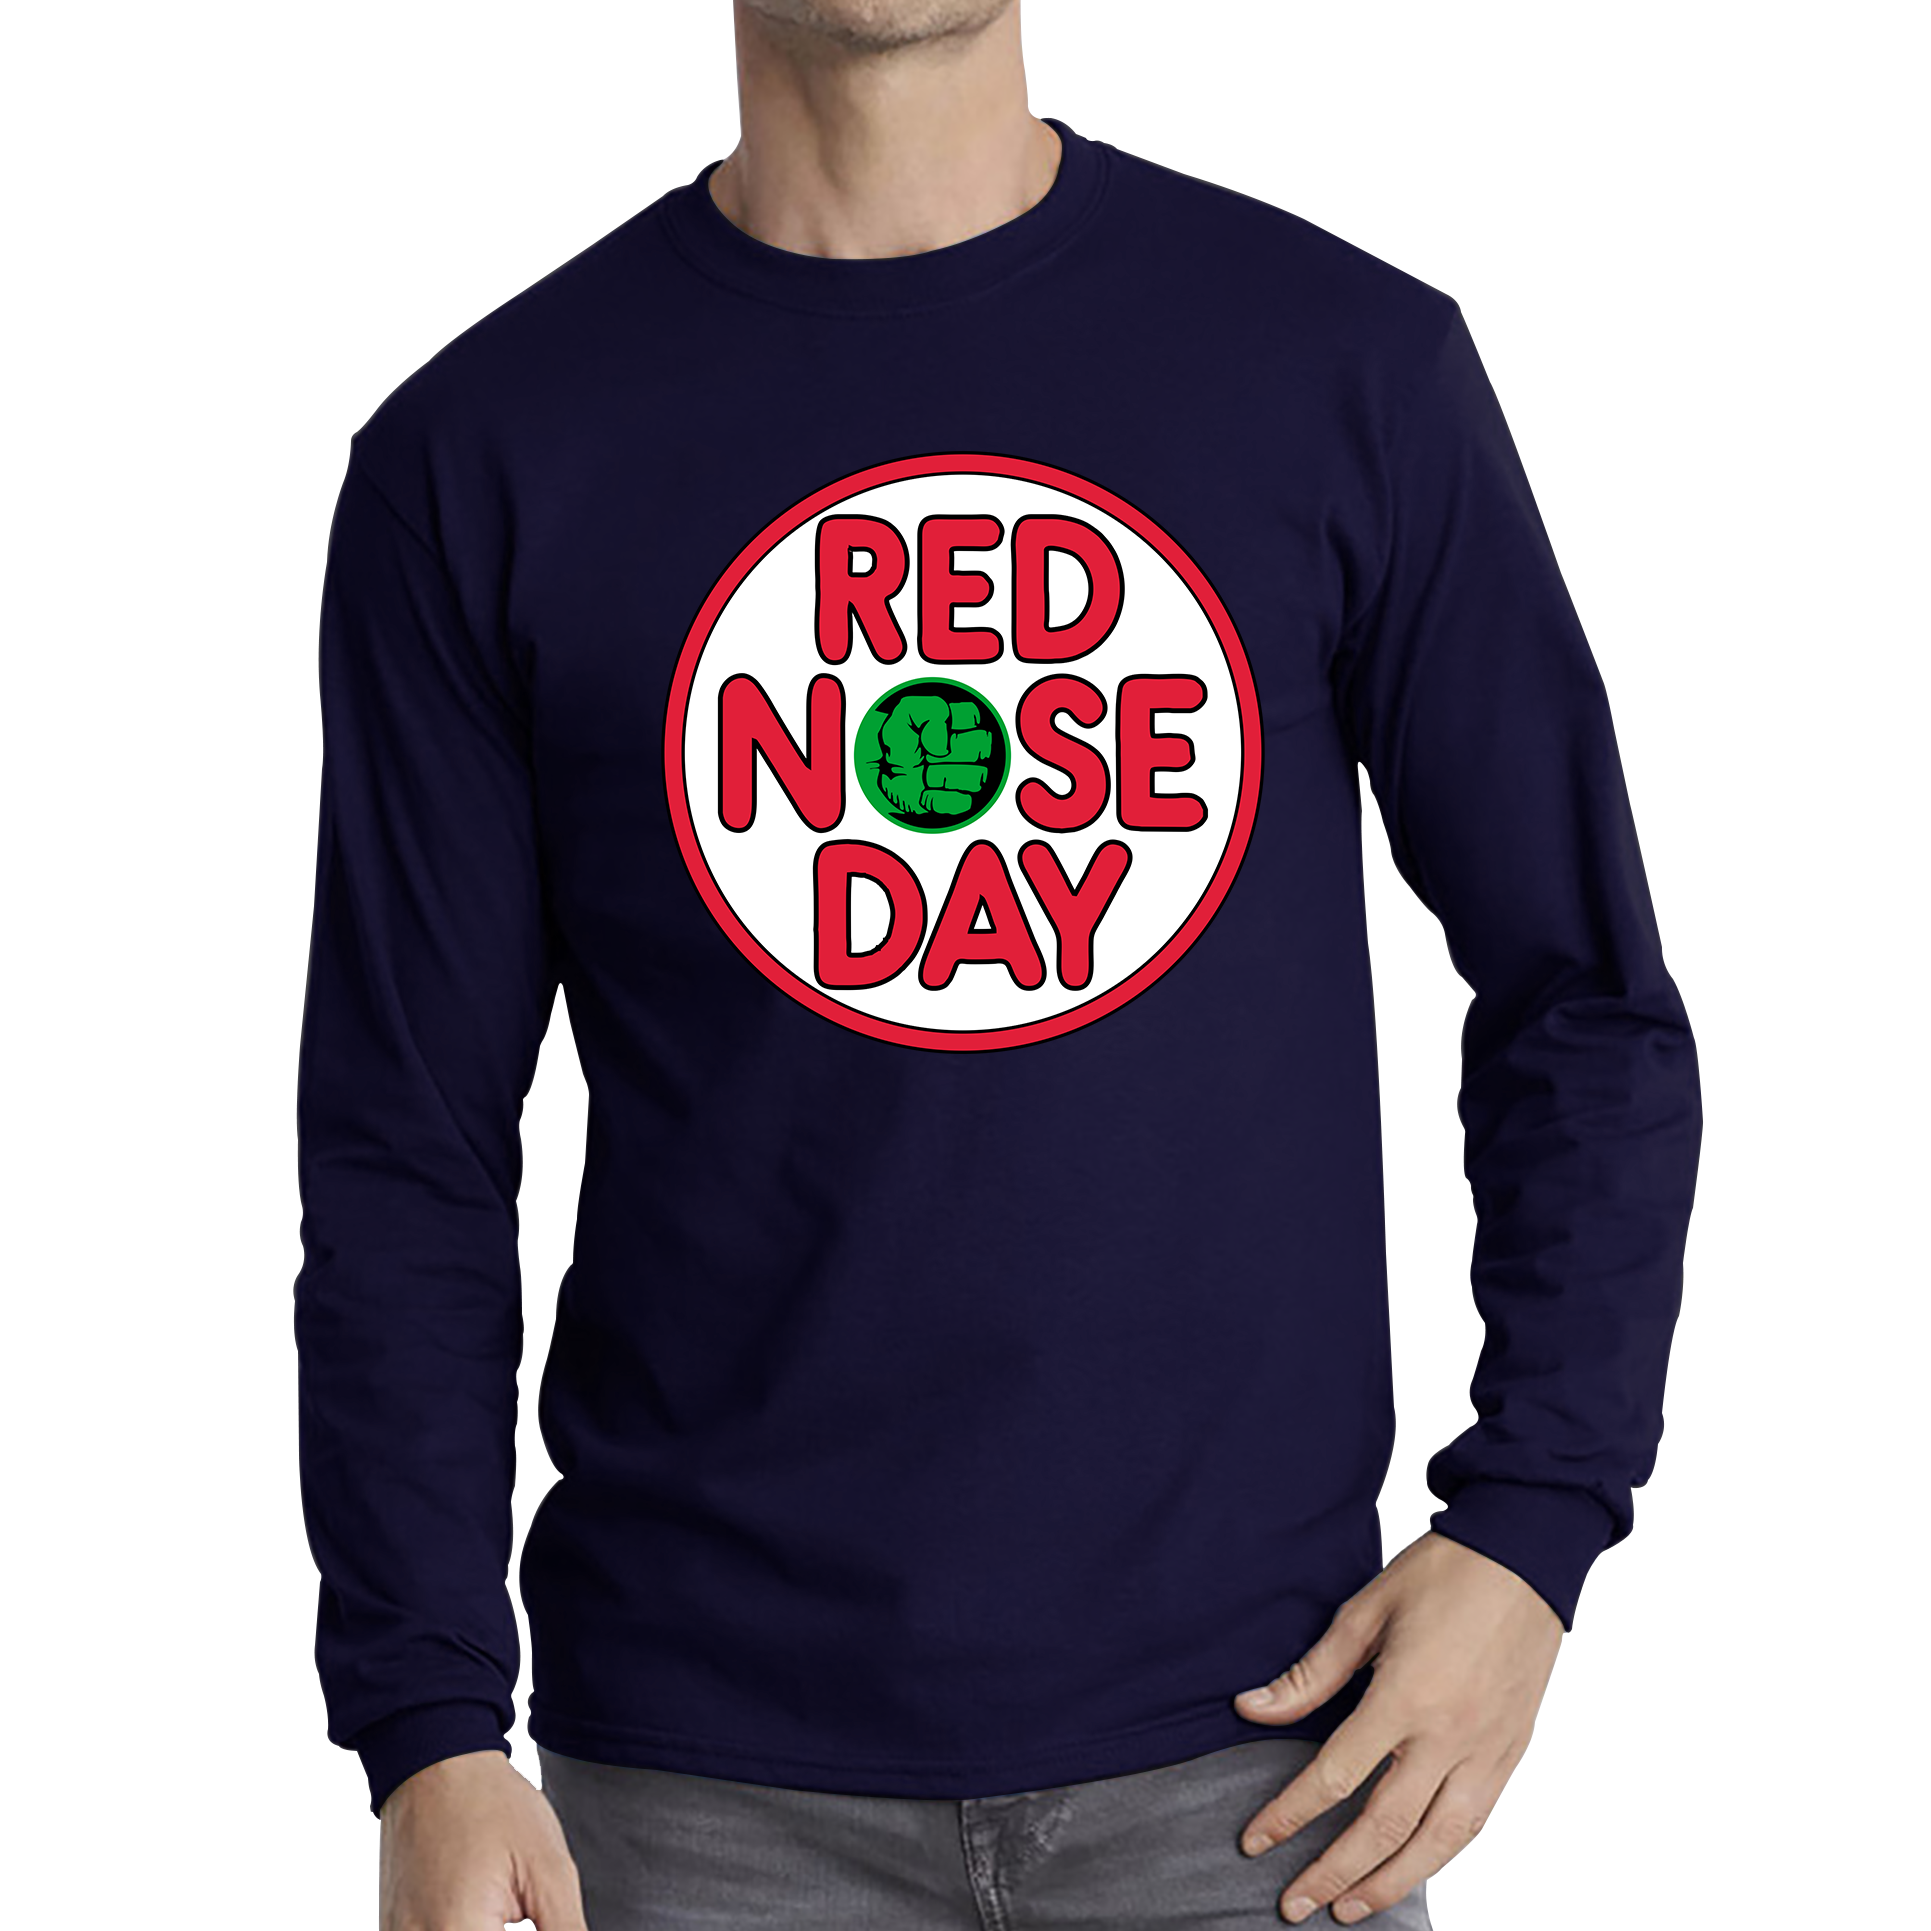 Marvel Avengers Hulk Hand Red Nose Day Adult Long Sleeve T Shirt. 50% Goes To Charity